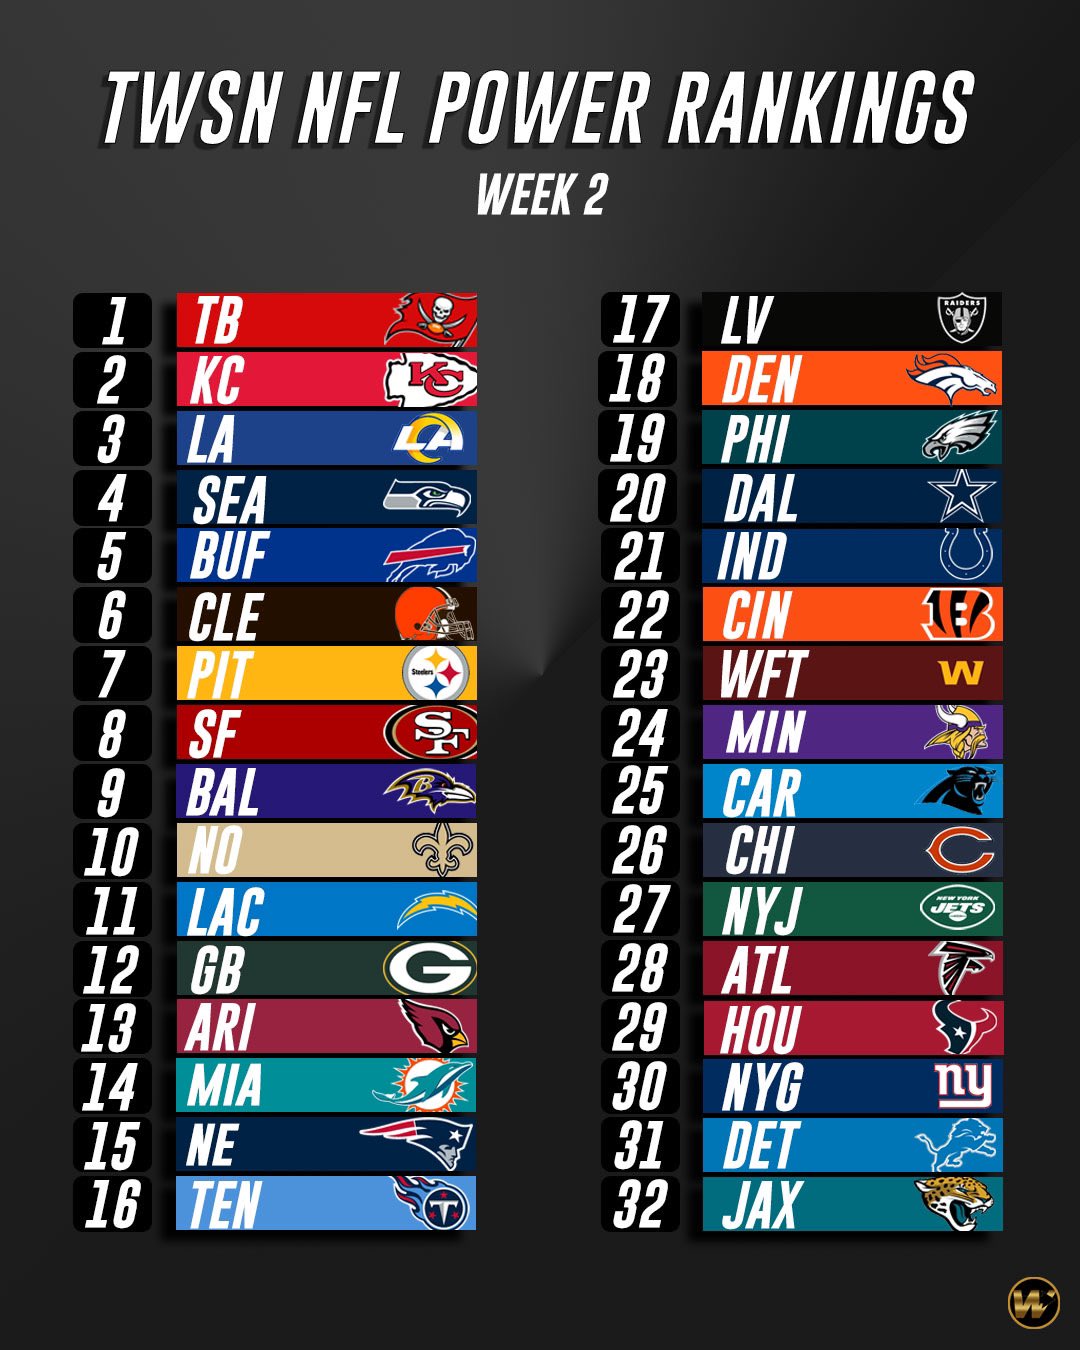 TWSN on X: 'Here are our NFL Power Rankings heading into Week 2